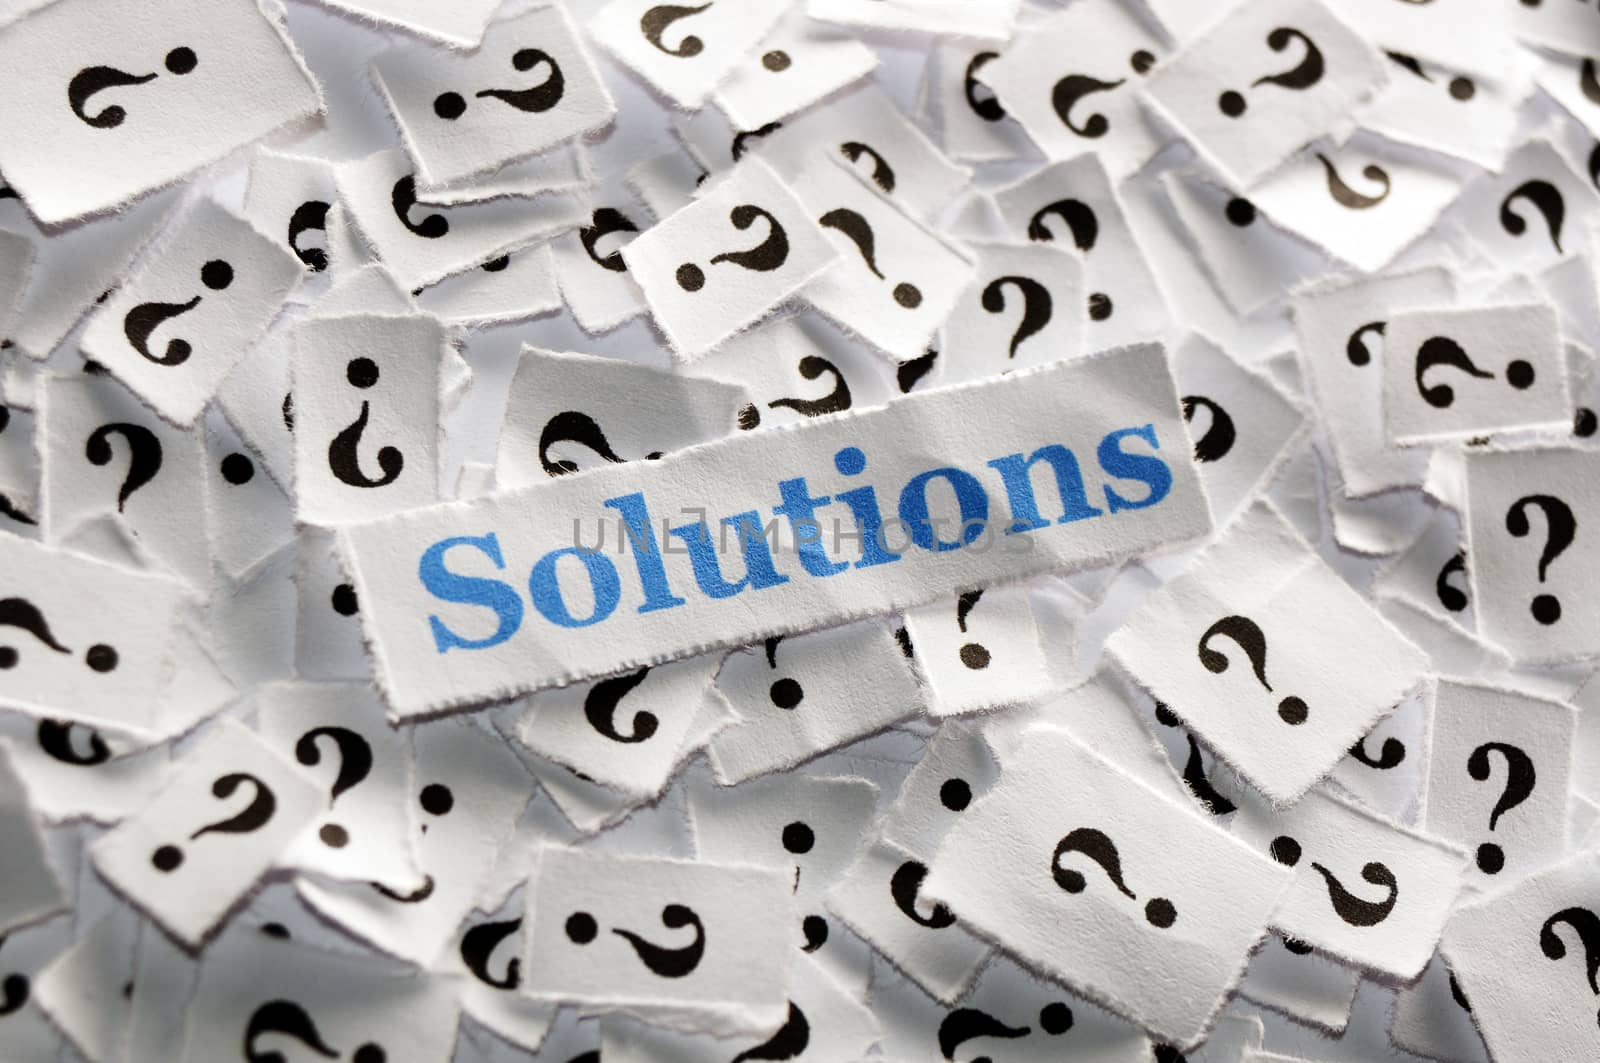 solutions on question marks on white papers -hard light